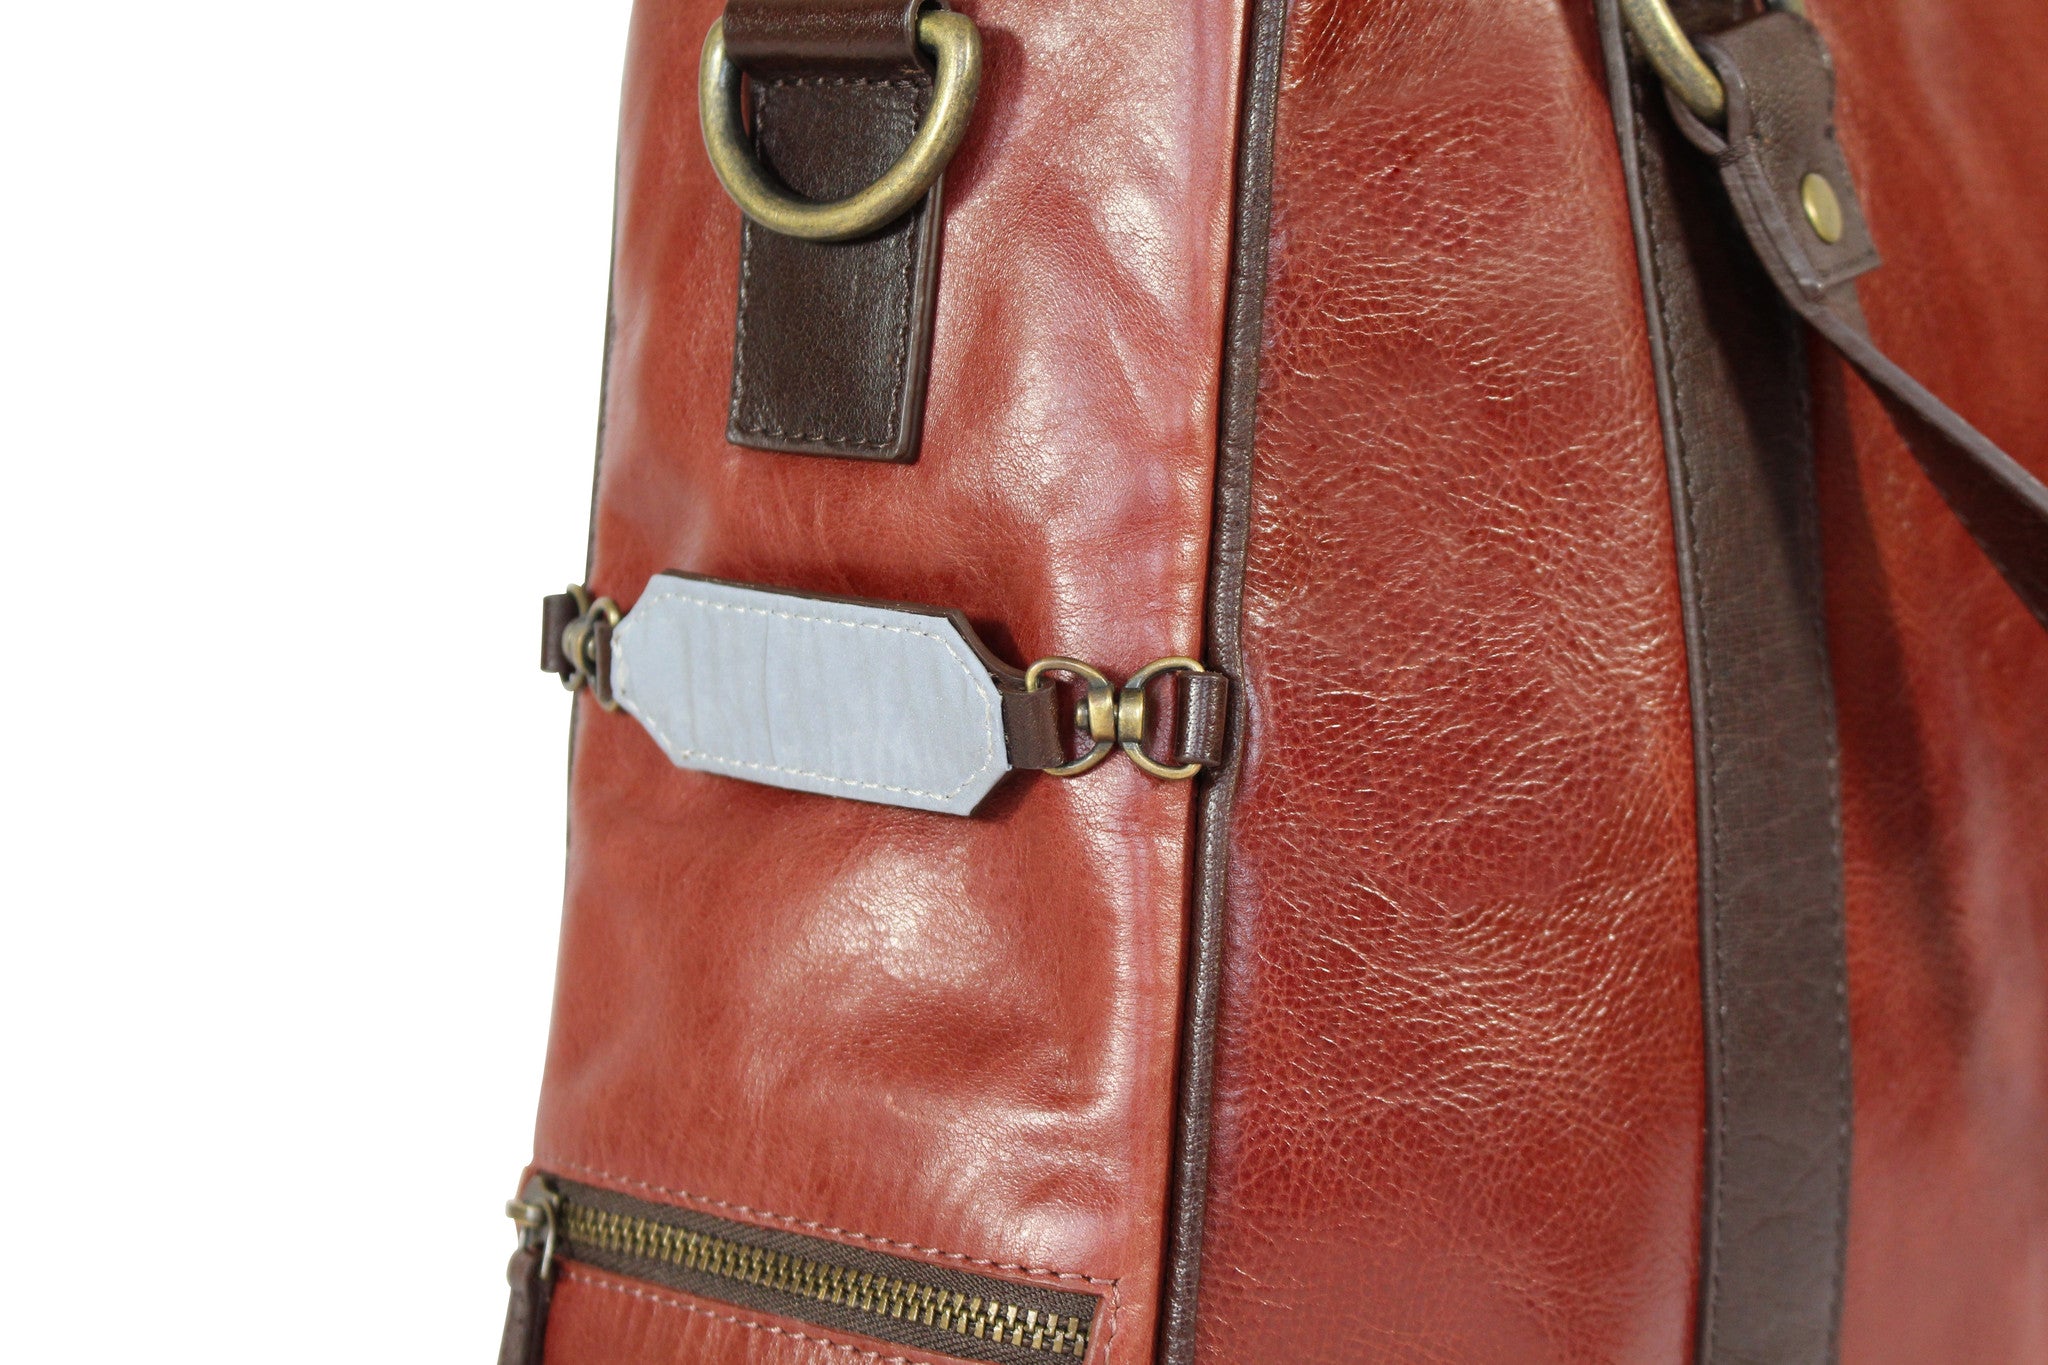 Hill and Ellis Duke Cherry Red Leather Satchel front view showing reflective strip